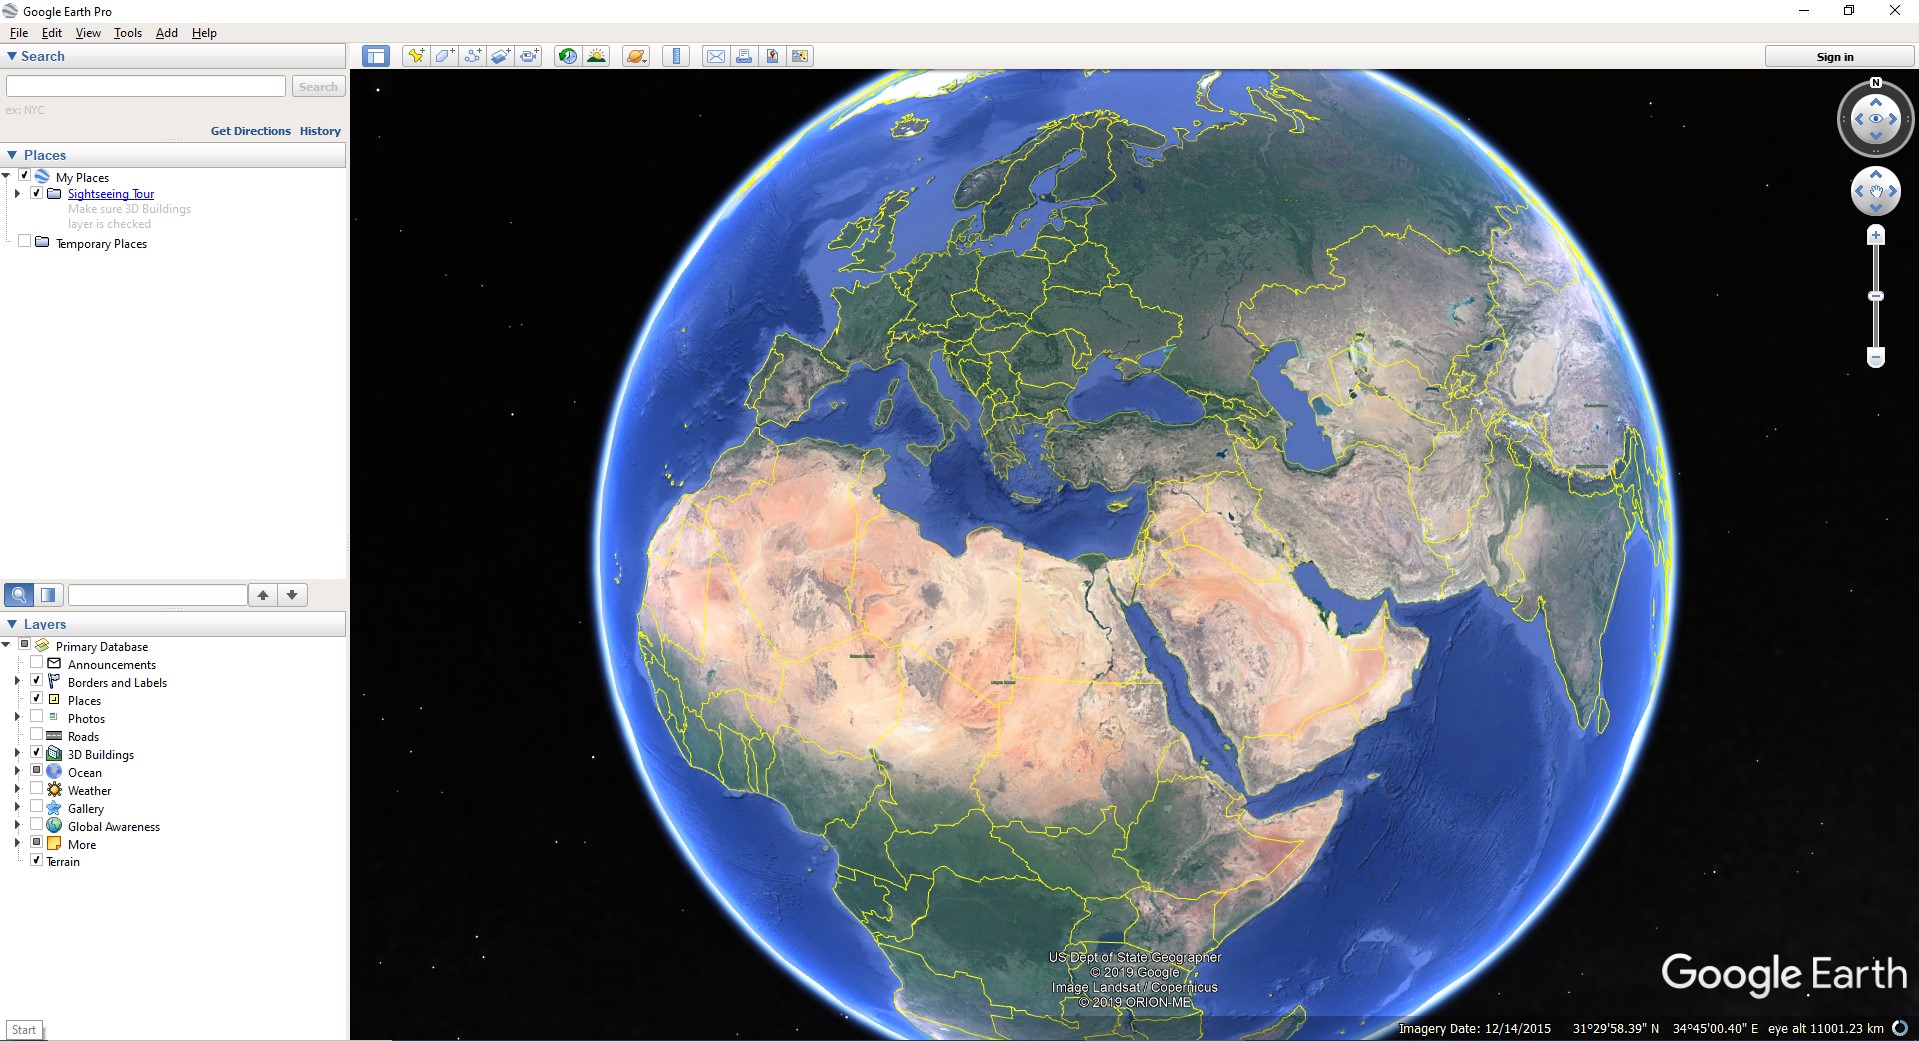 google earth free download 2010